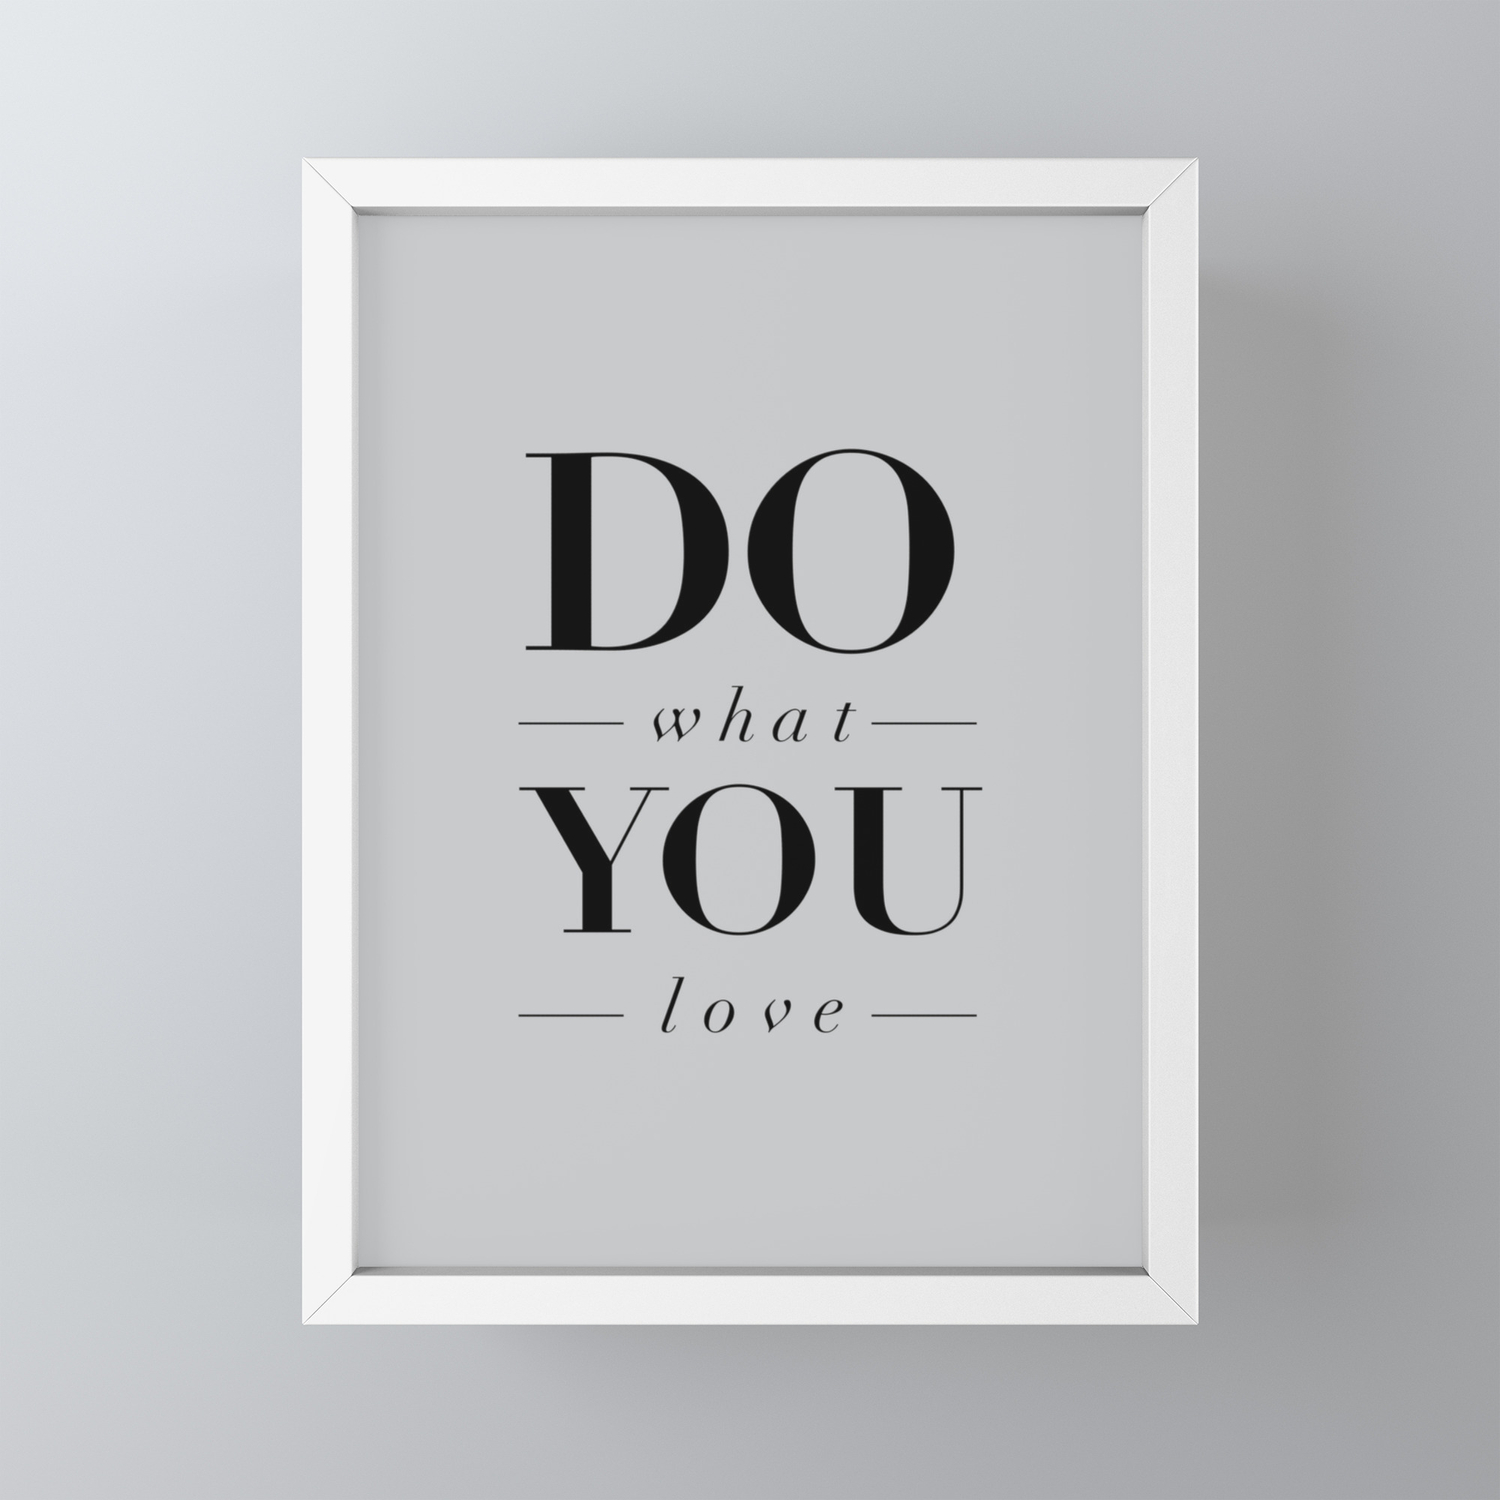 Do What You Love Beautiful Inspirational Short Quote About Happiness And Life Quotes Framed Mini Art Print By Themotivatedtype Society6